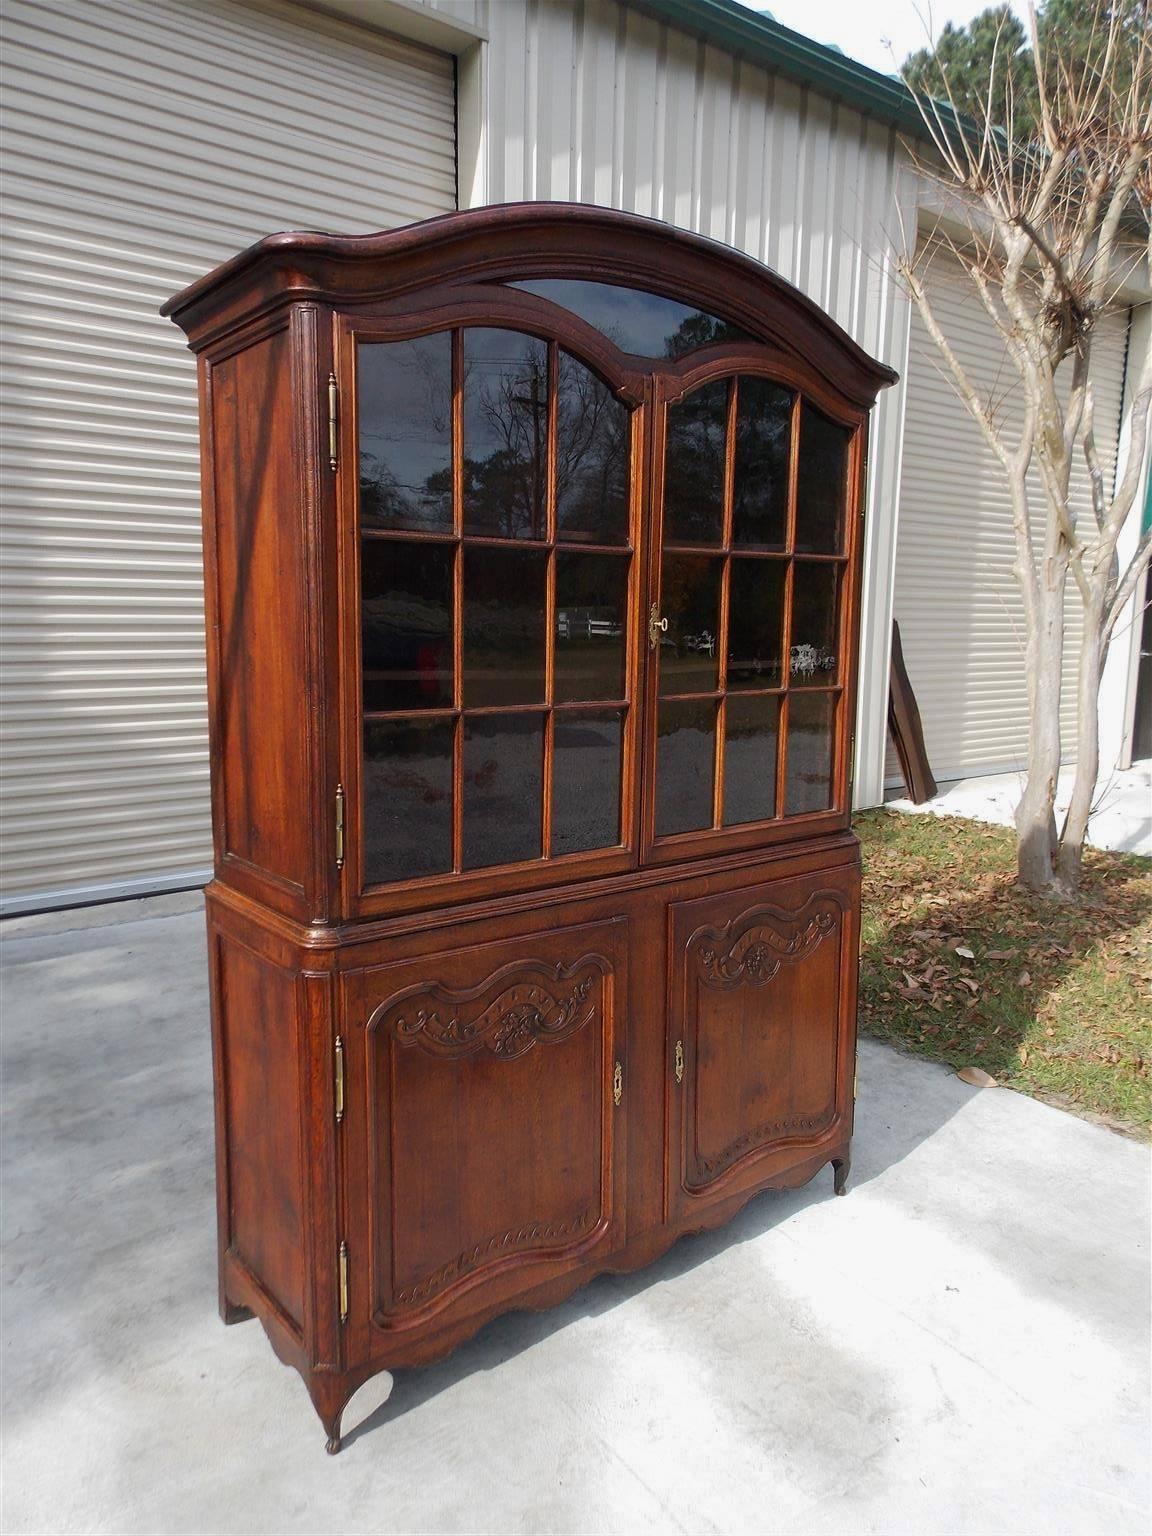 French Provincial walnut cupboard with arched dome cornice, flanking upper case glass doors with adjustable interior shelving, lower case flanking doors on the original brass hinges, hand carved exterior floral molding and terminating on the